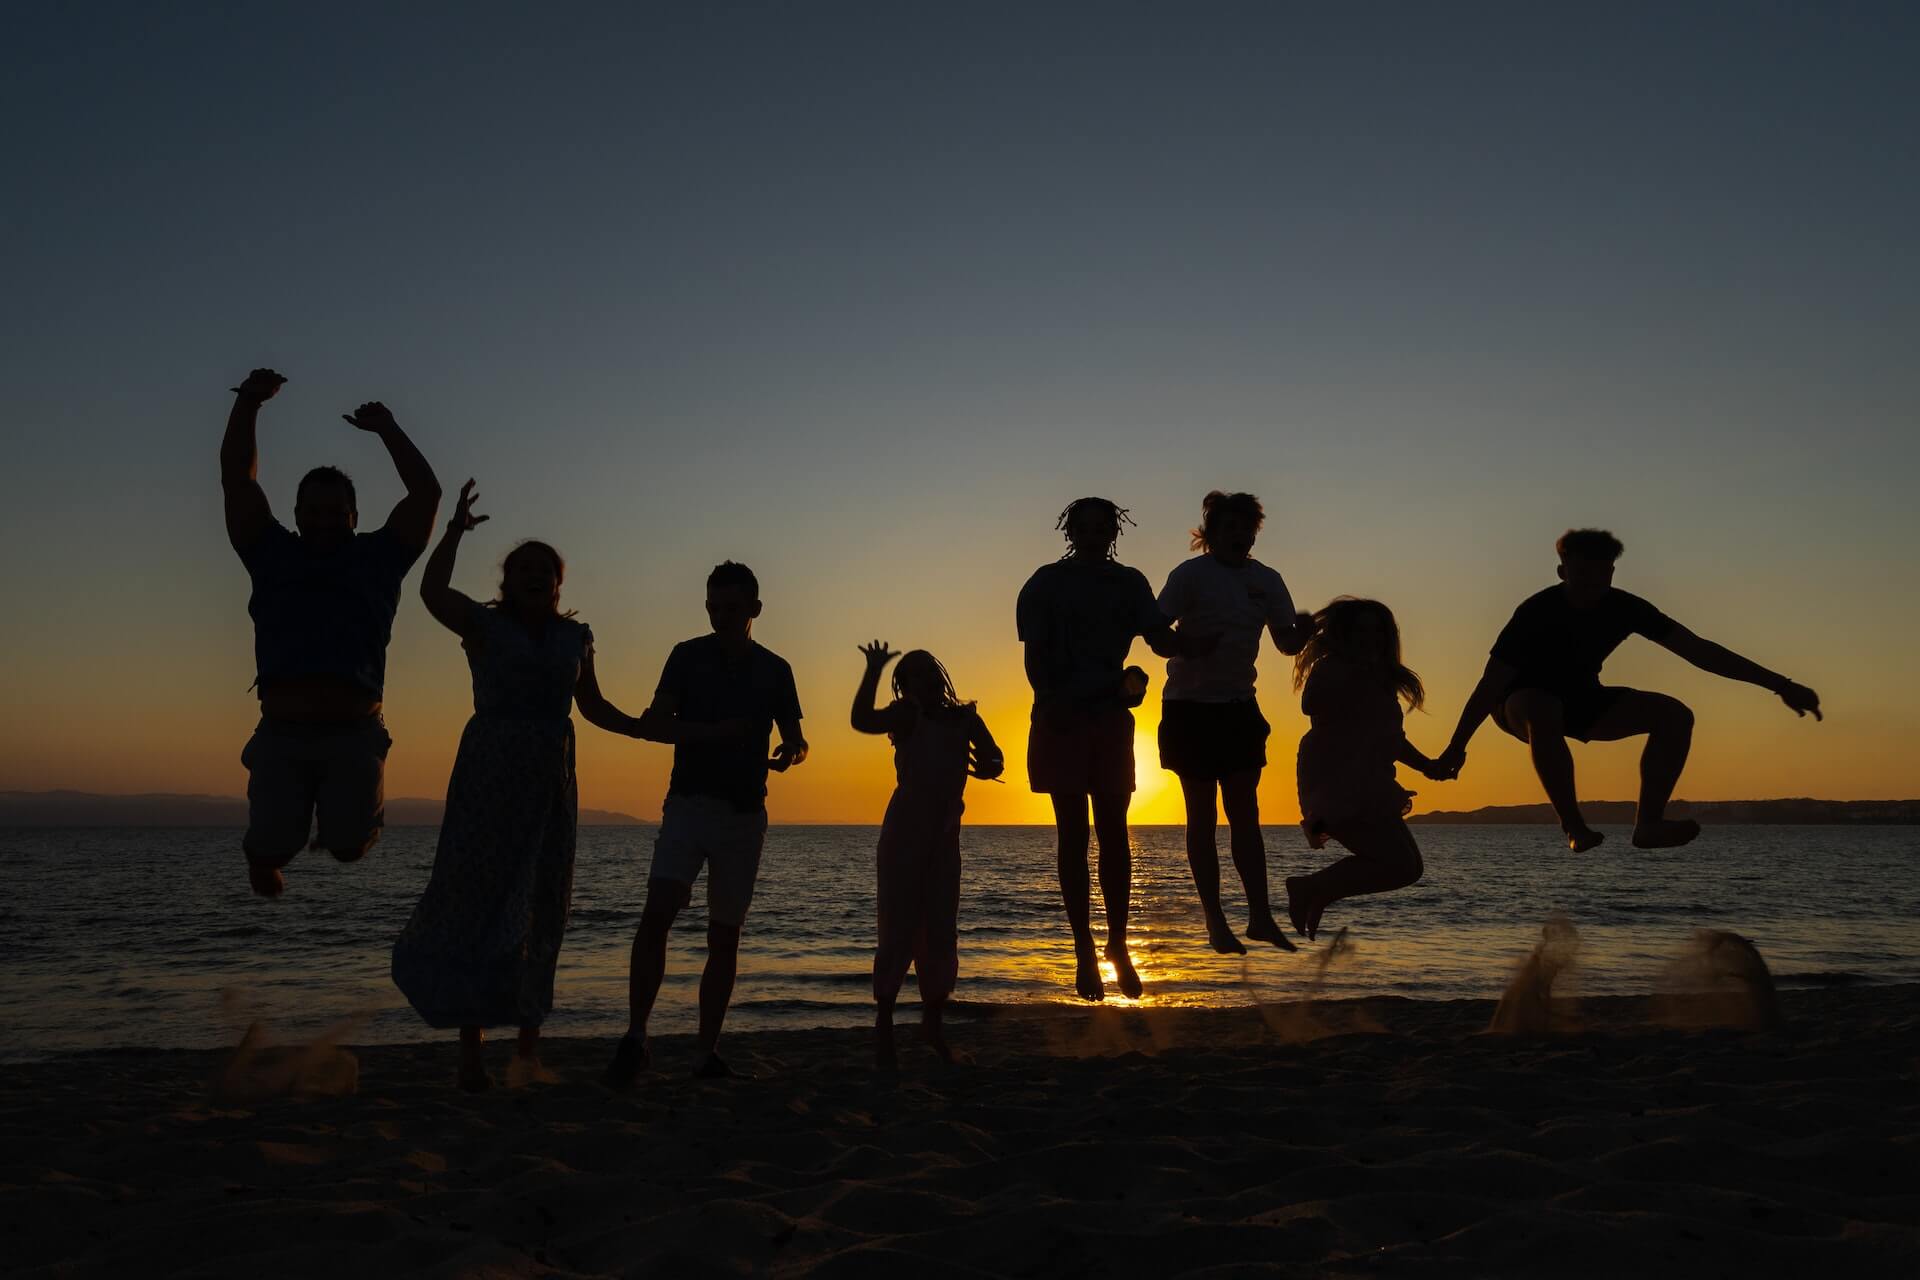 Image of a large family jumping together at the beach while the sun sets behind them